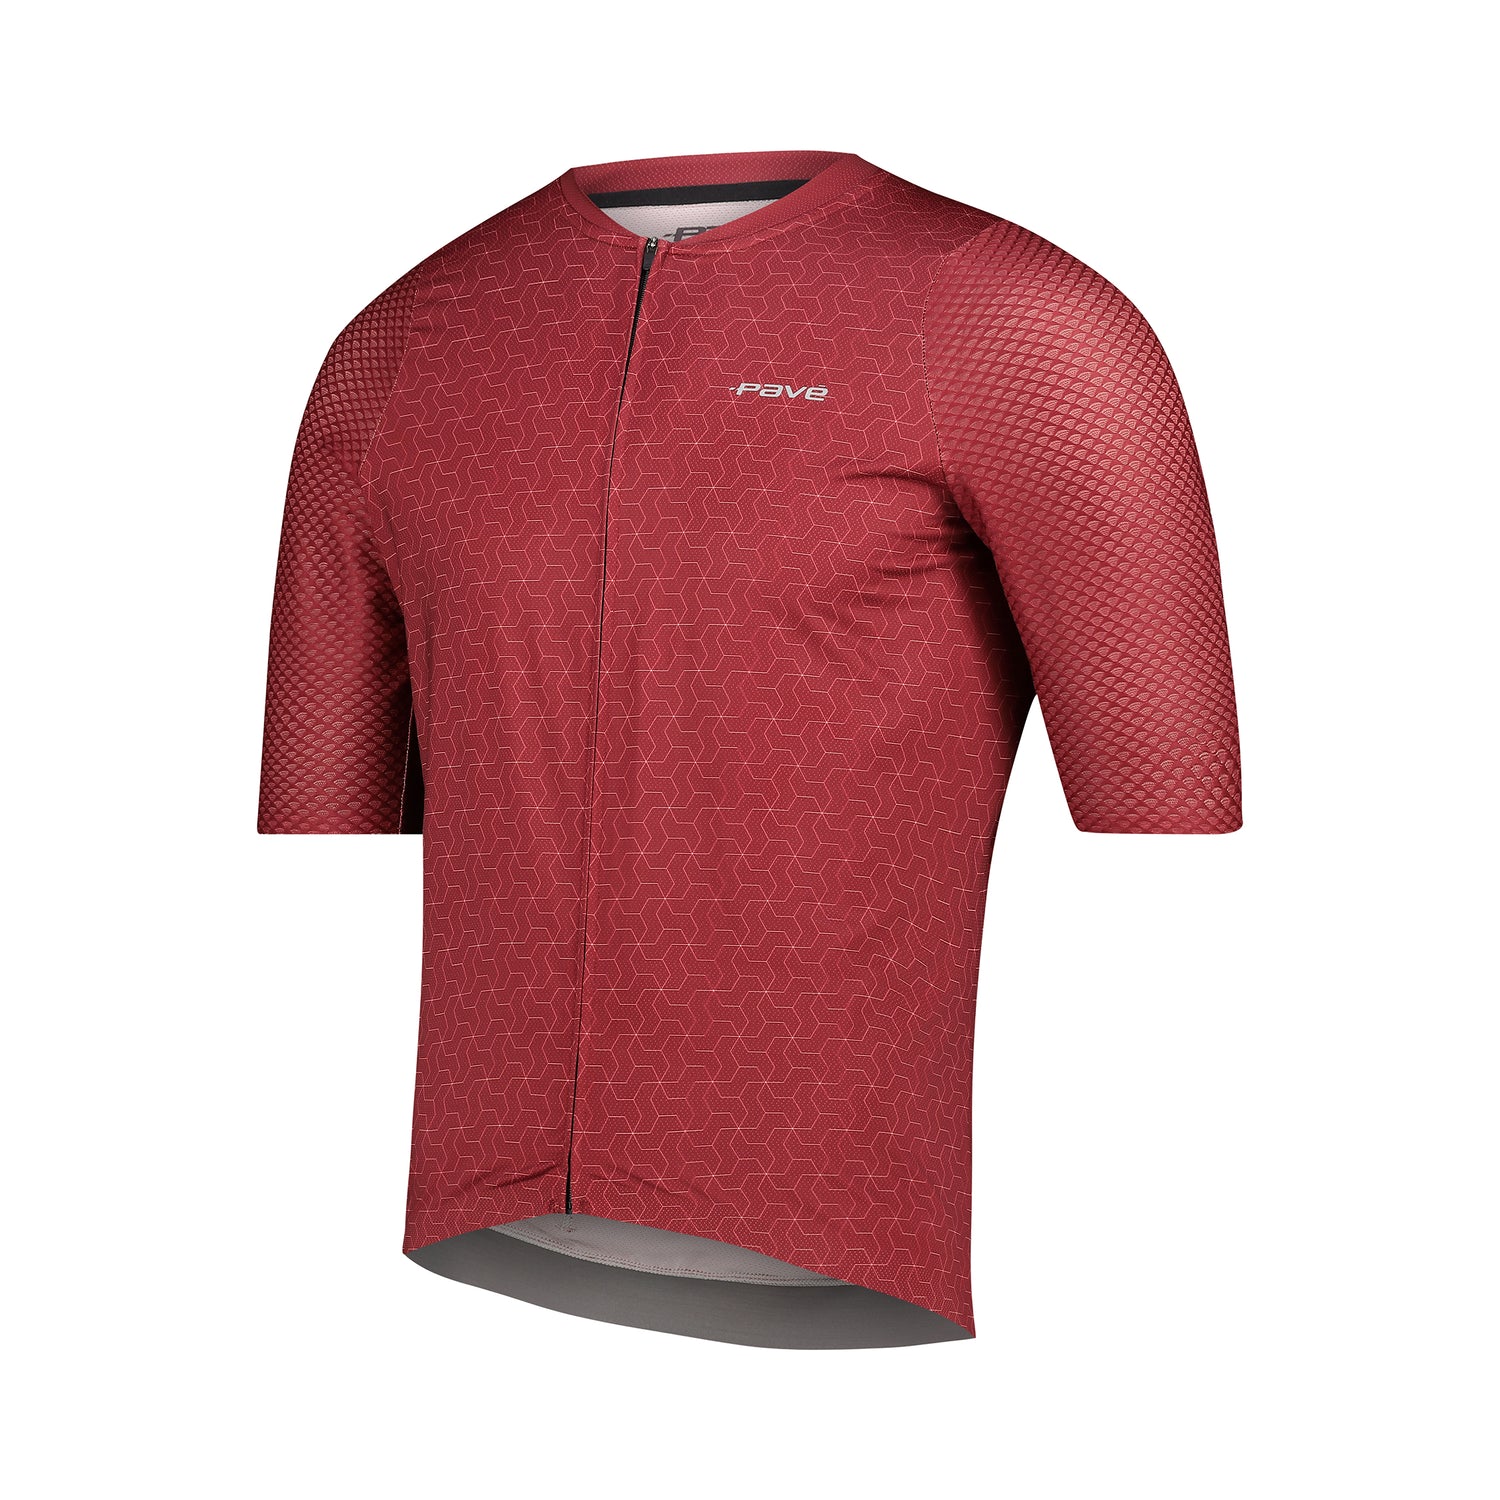 Pave cycling shirt on mannequin